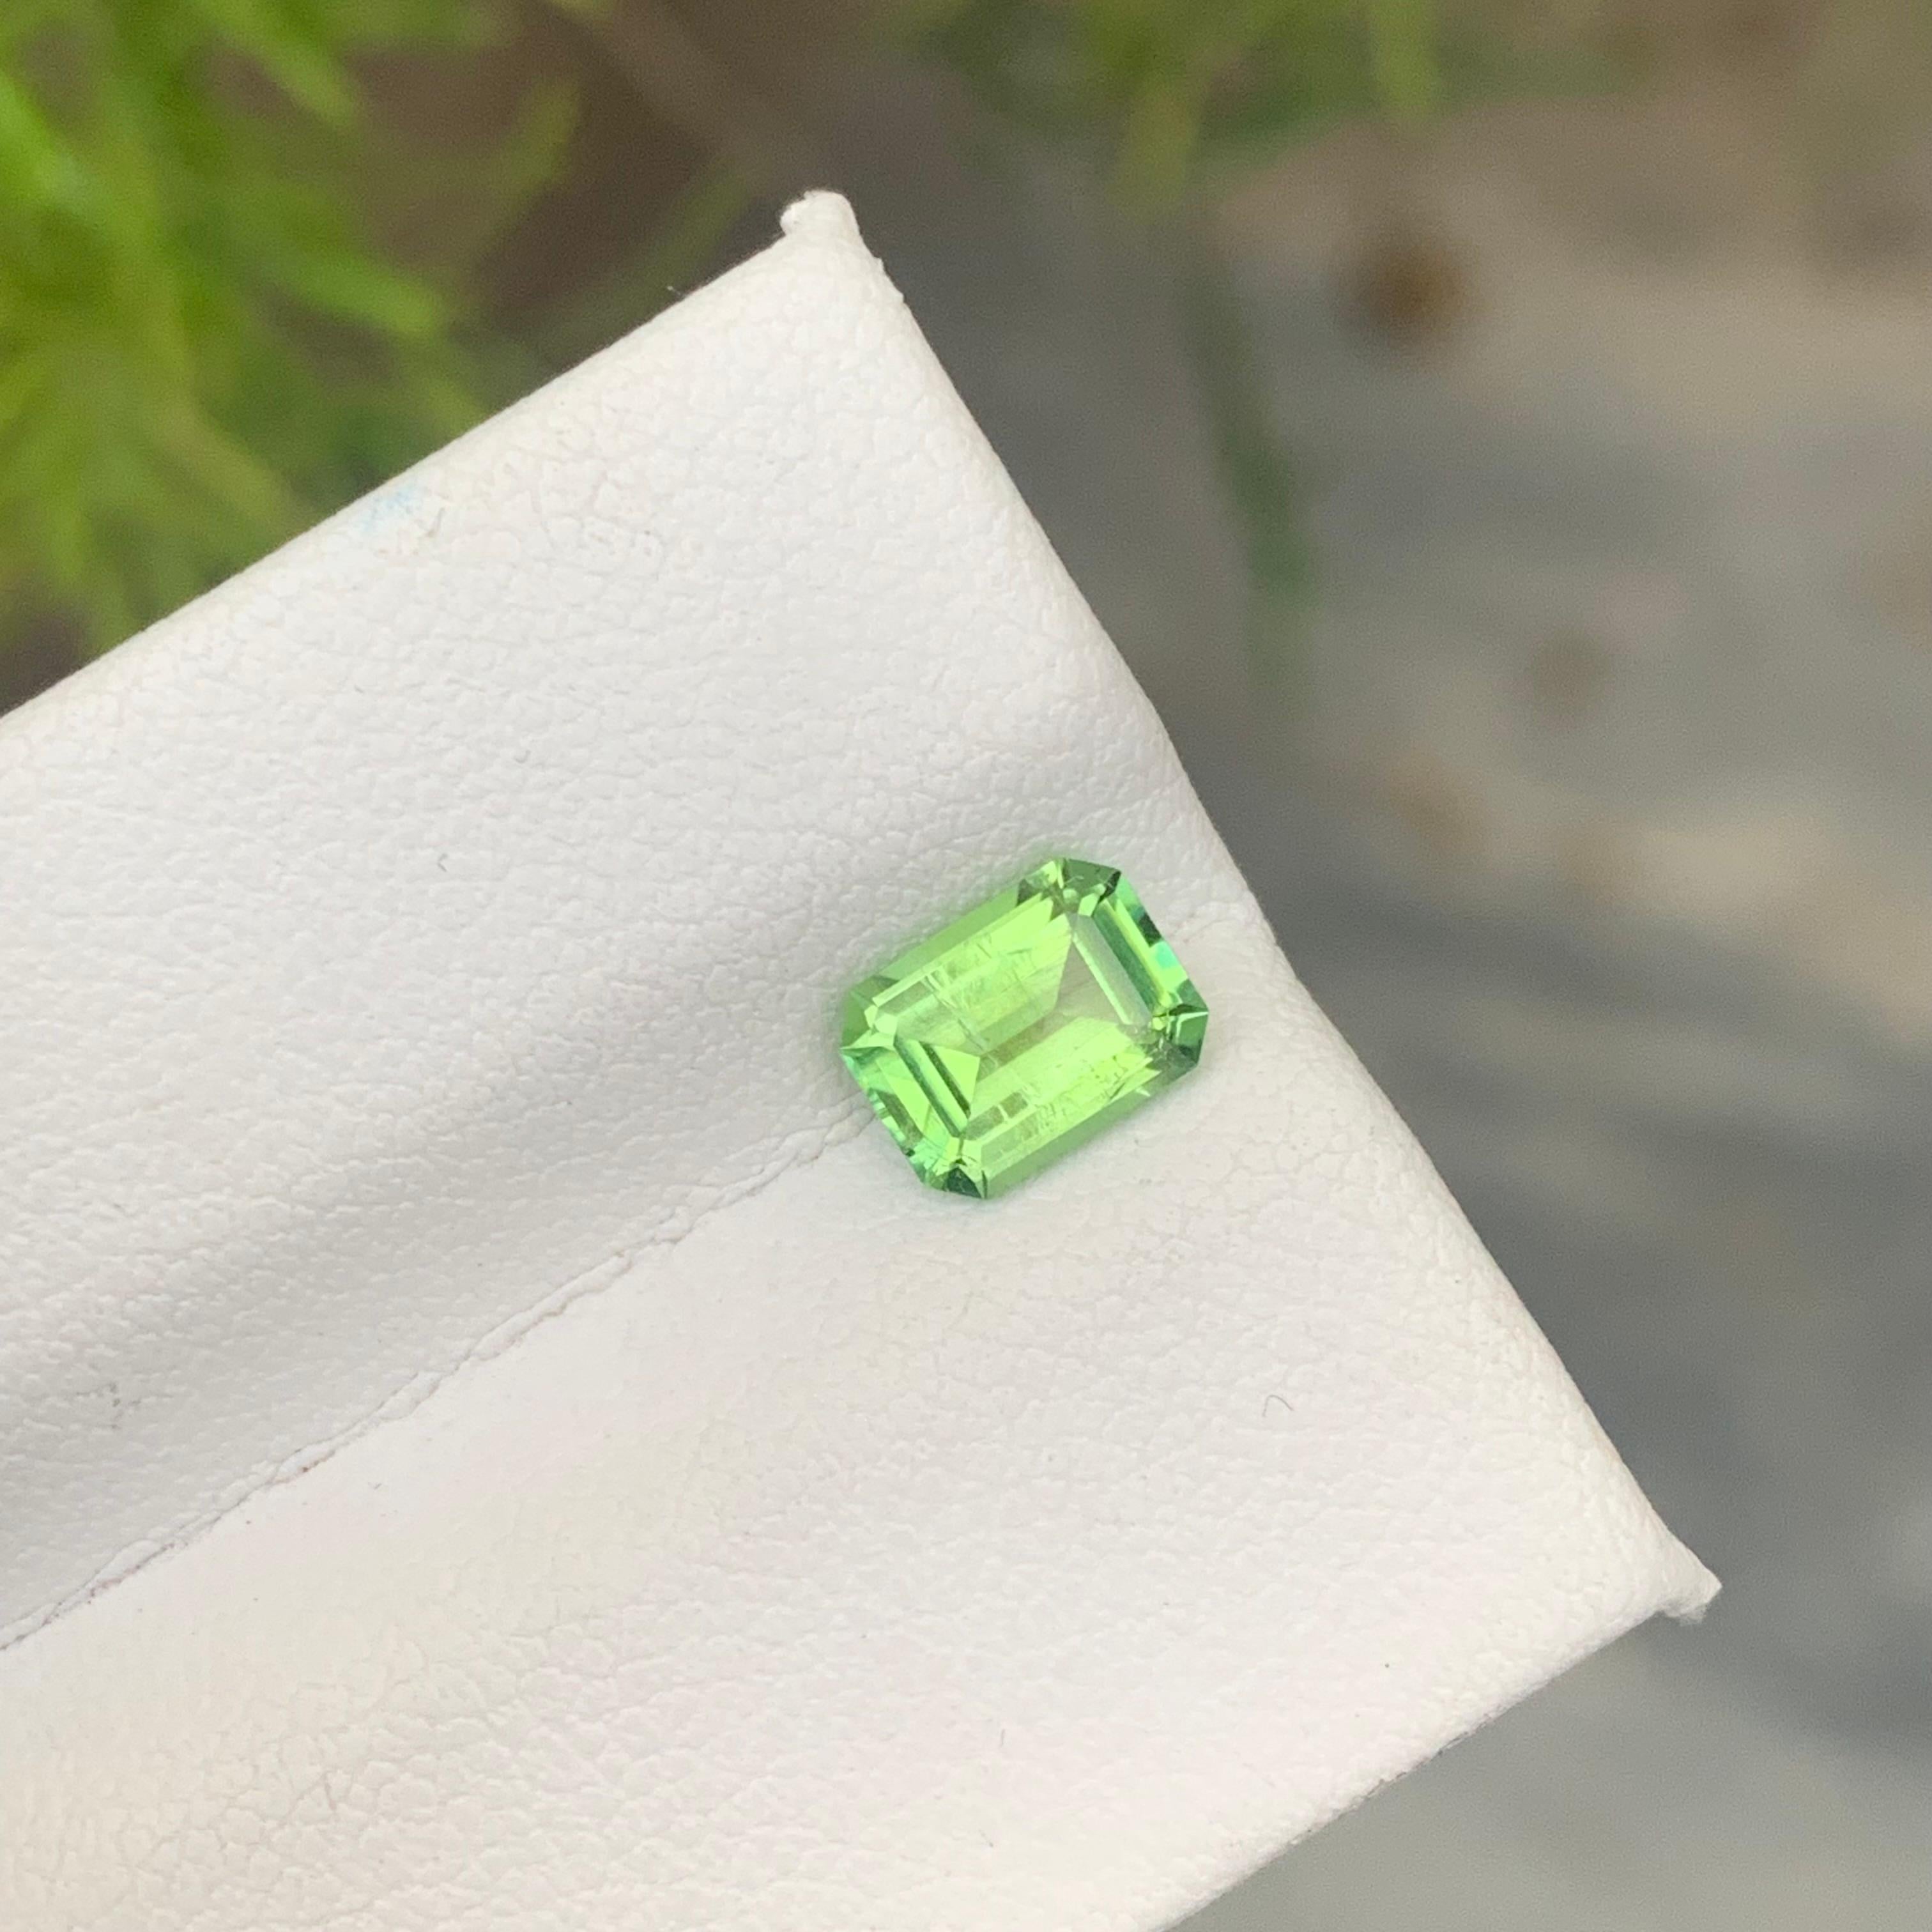 0.95 Carat Natural Loose Green Afghani Tourmaline Emerald Cut Gemstone for Ring For Sale 5